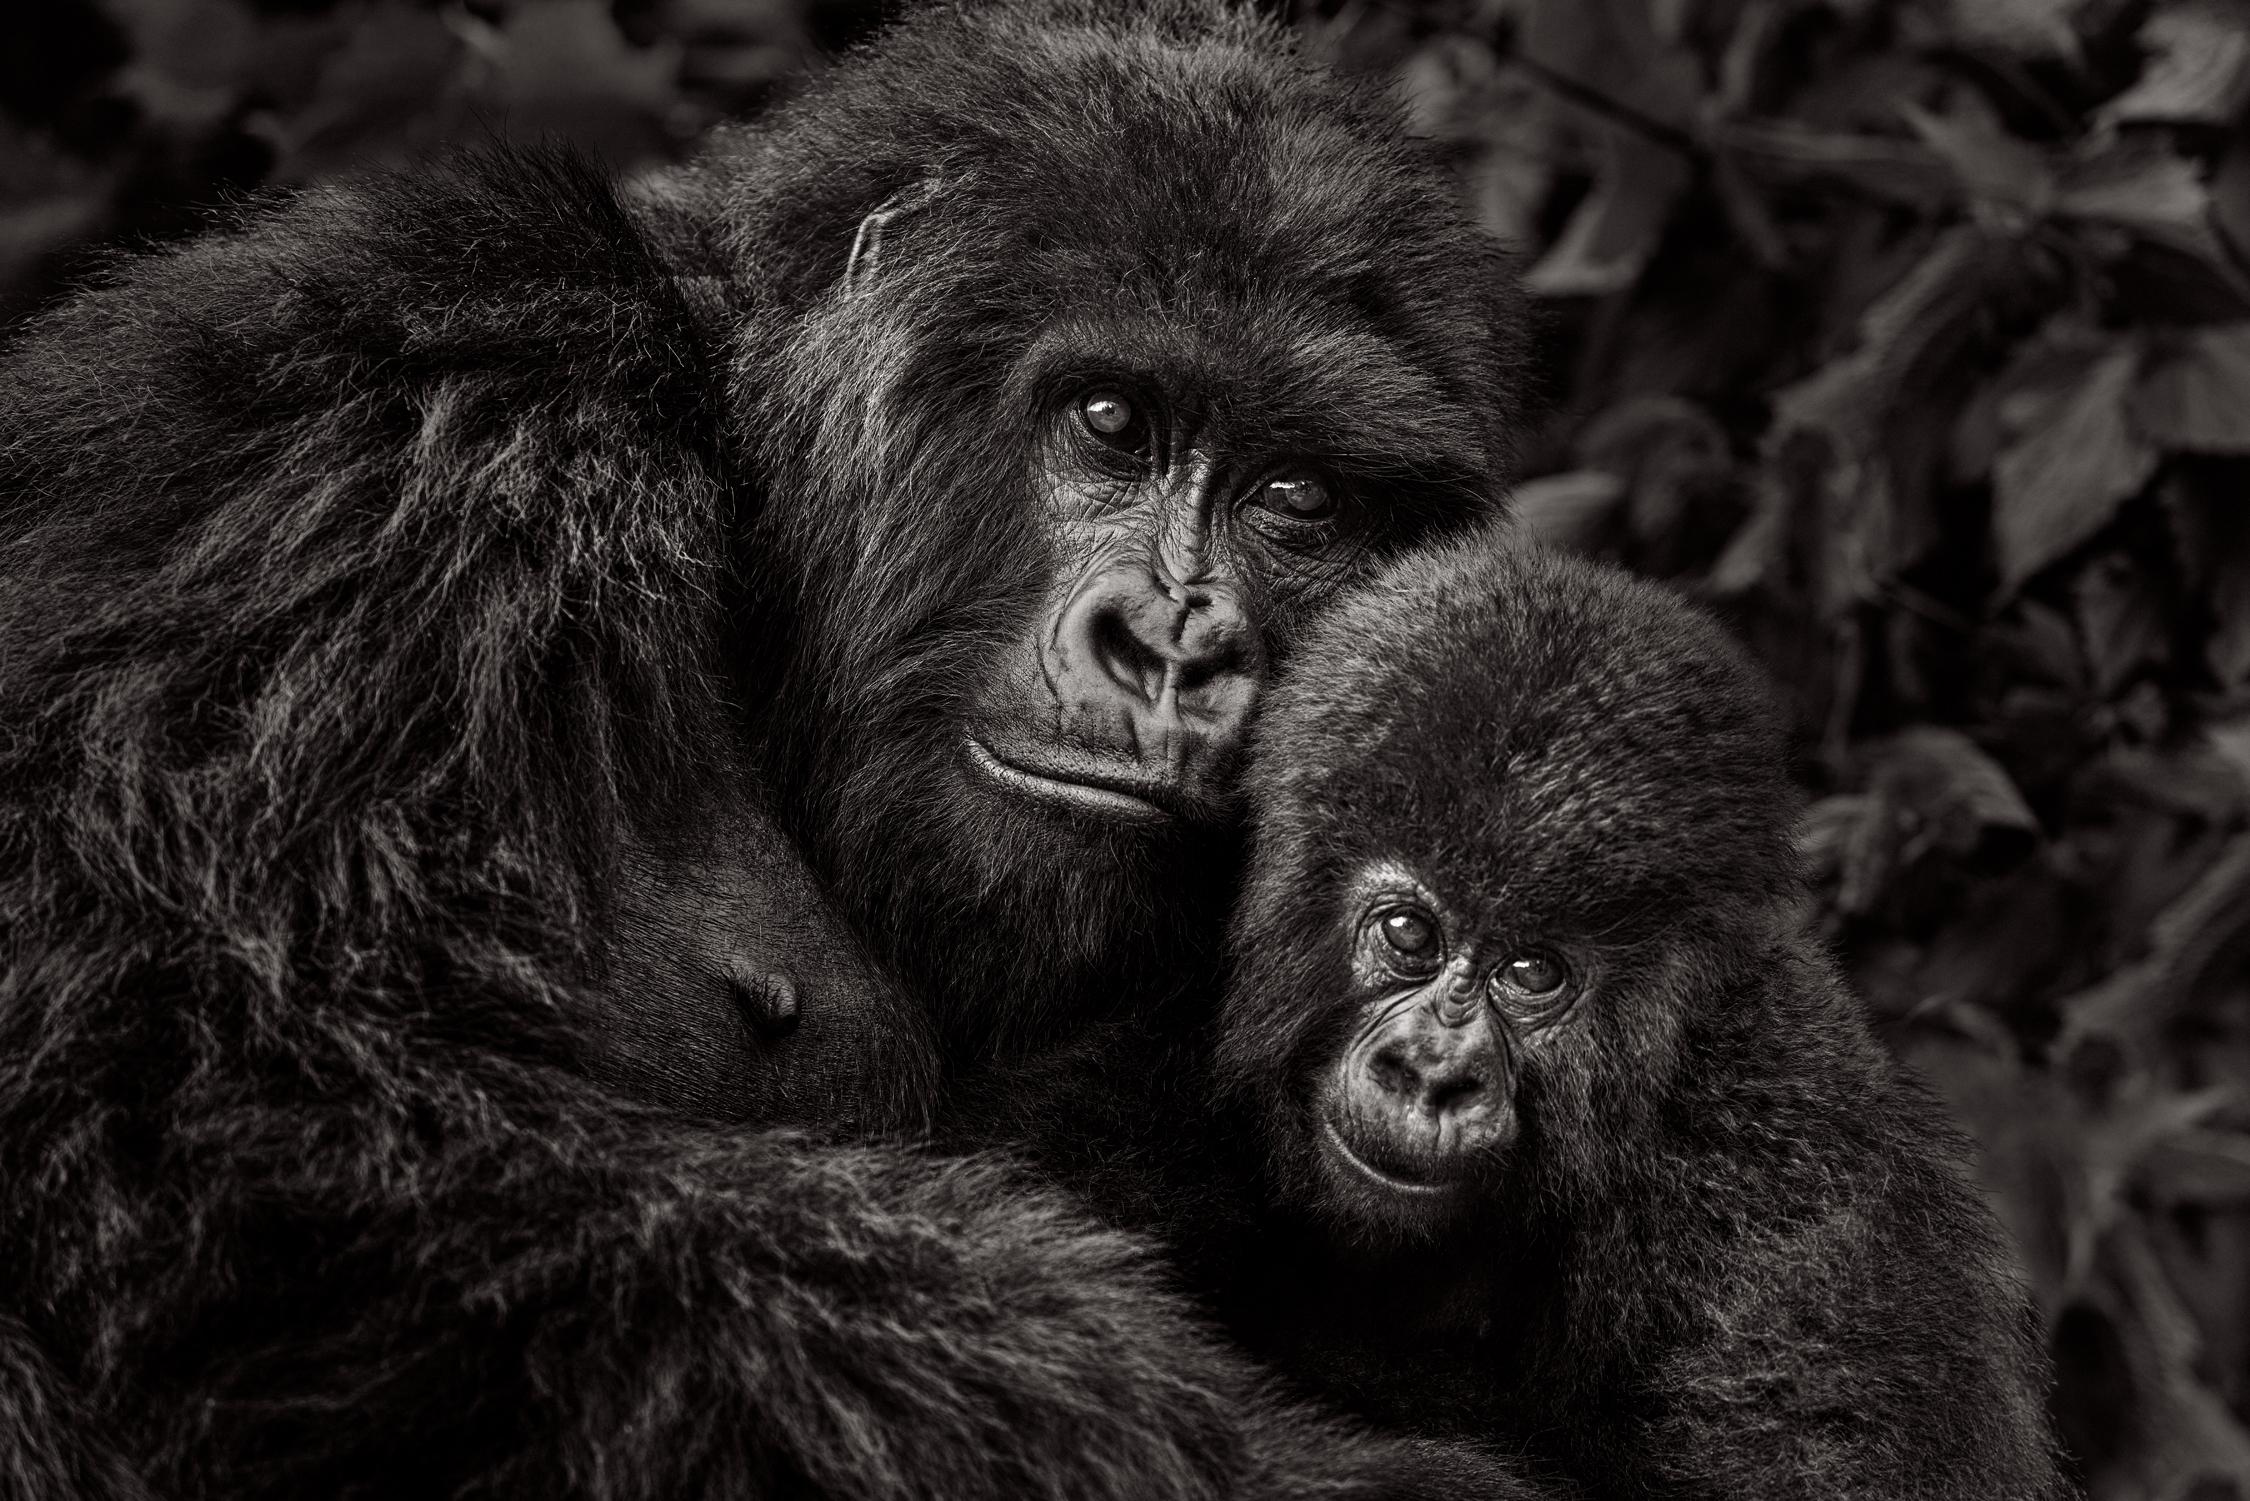 Drew Doggett Black and White Photograph - A mother gorilla with her infant looking at the camera